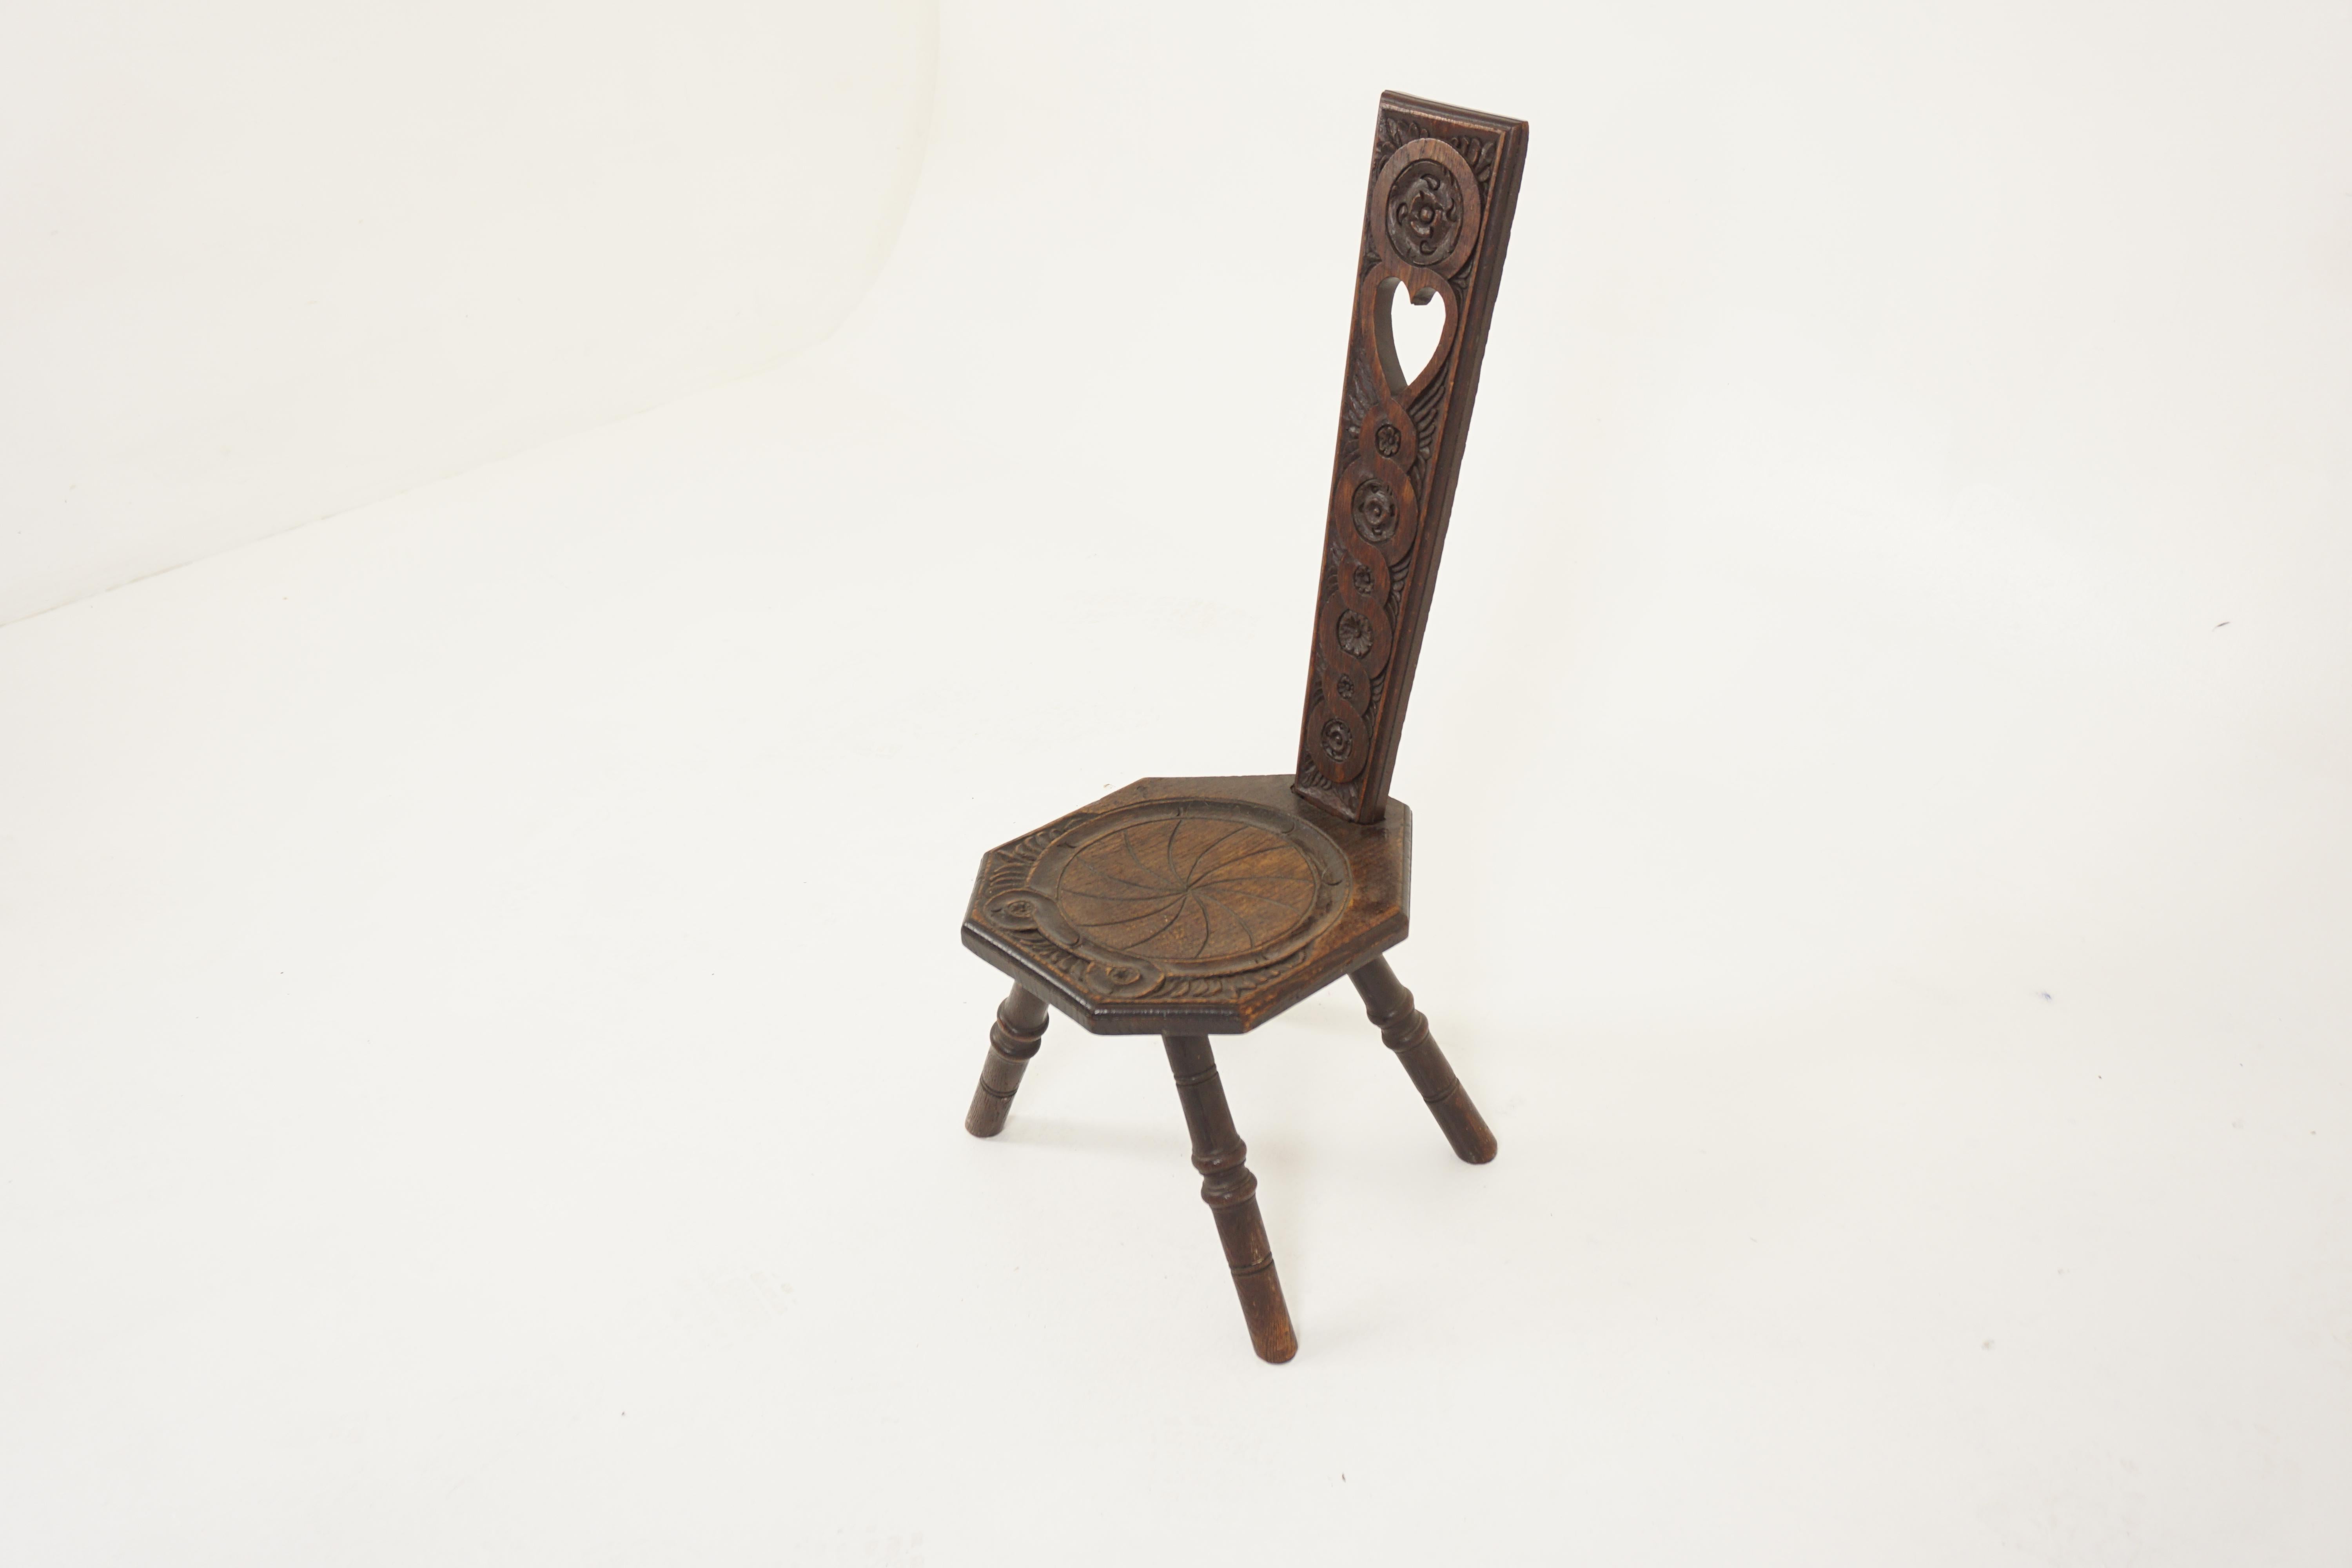 Arts and Crafts Carved Oak Spinning chair, hall chair, Scotland 1910, H030

Scotland 1910
Solid Oak
Original finish
Having a beautifully carved seat
With a high back and an inset heart
All standing on four turned splayed legs
Wonderful quality and